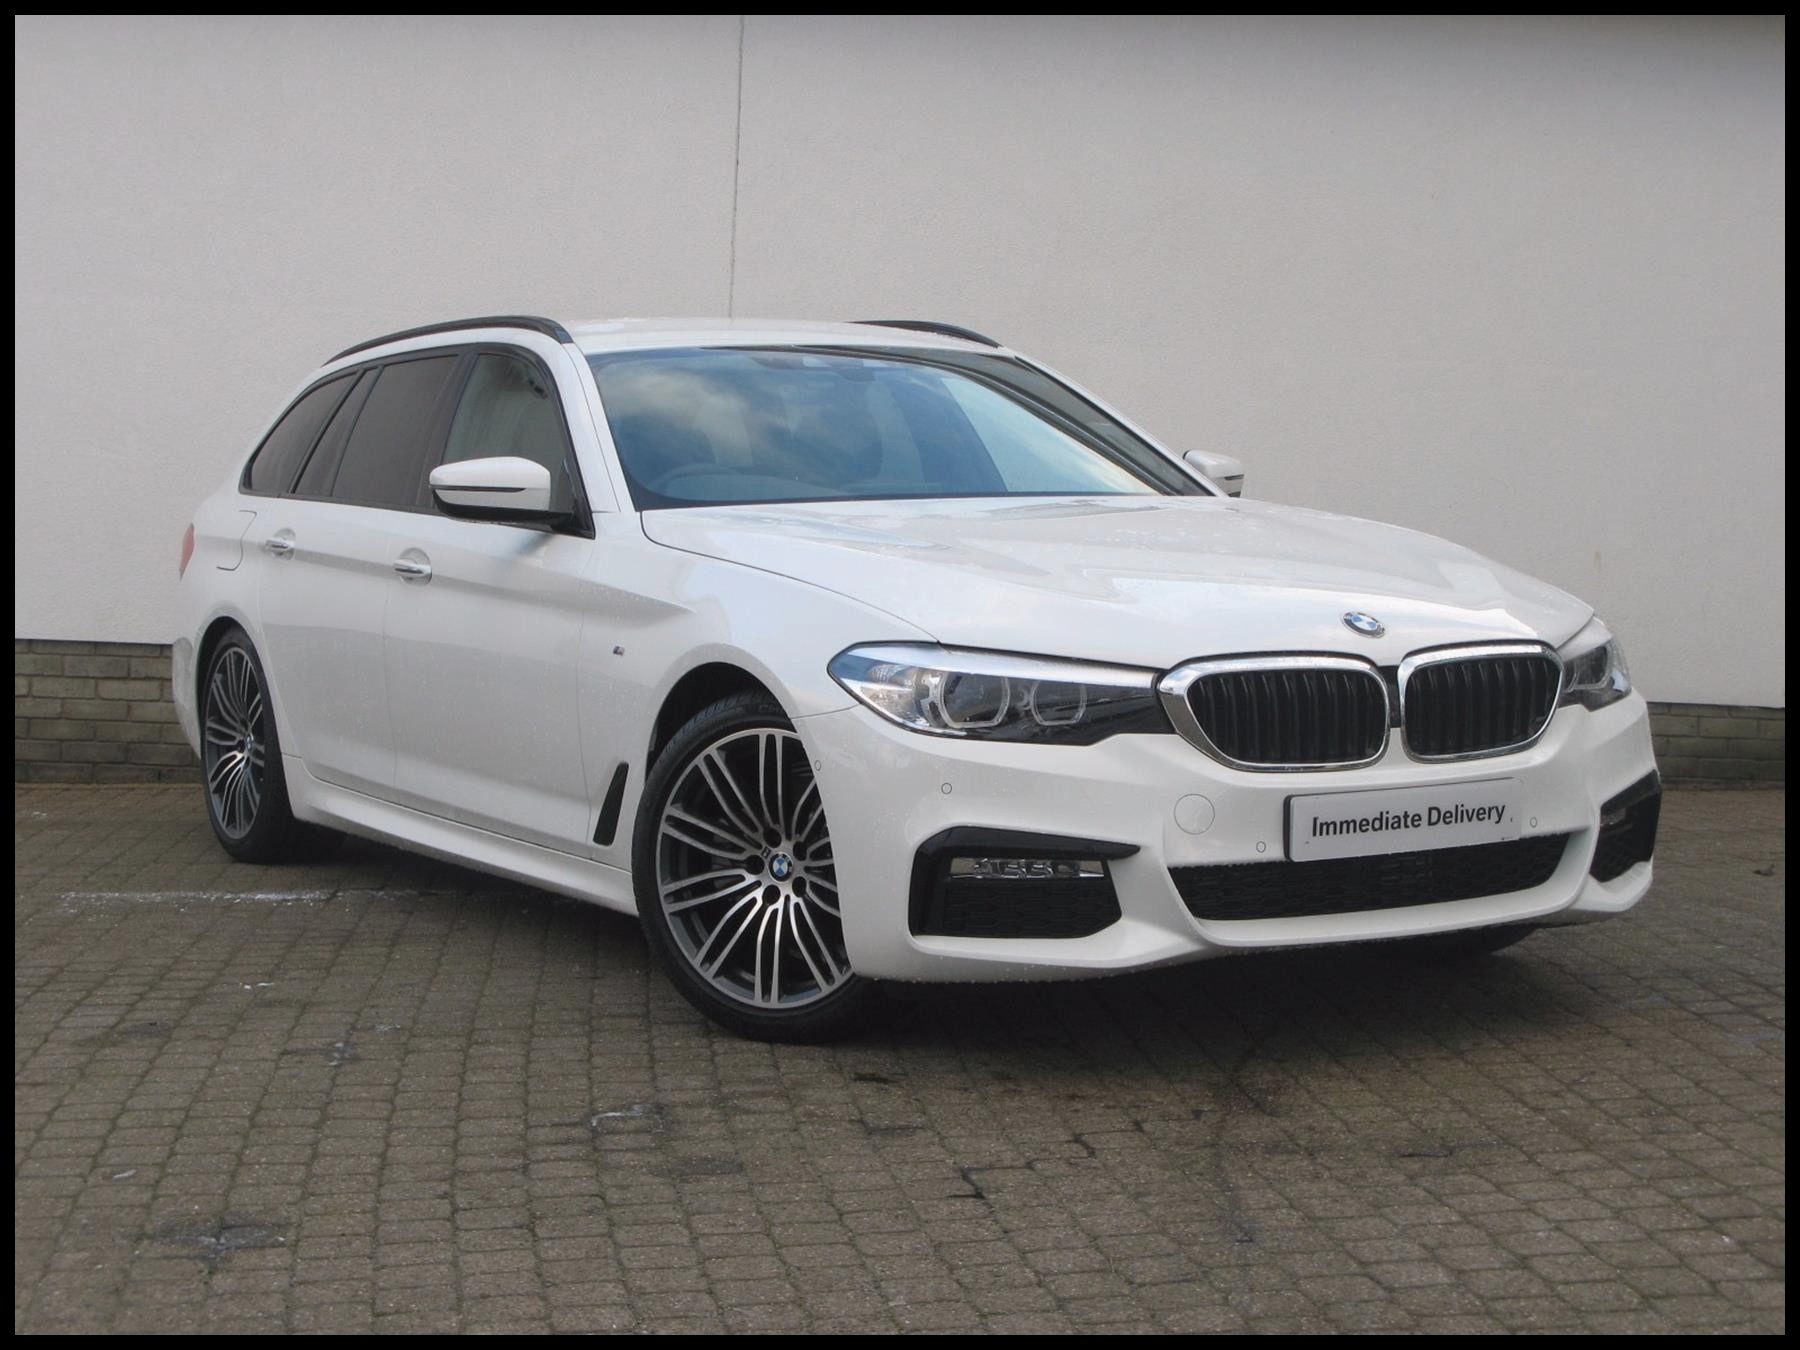 Bmw 525i for Sale Used Unique Stylish Used 2017 Bmw 5 Series G31 520d M Sport